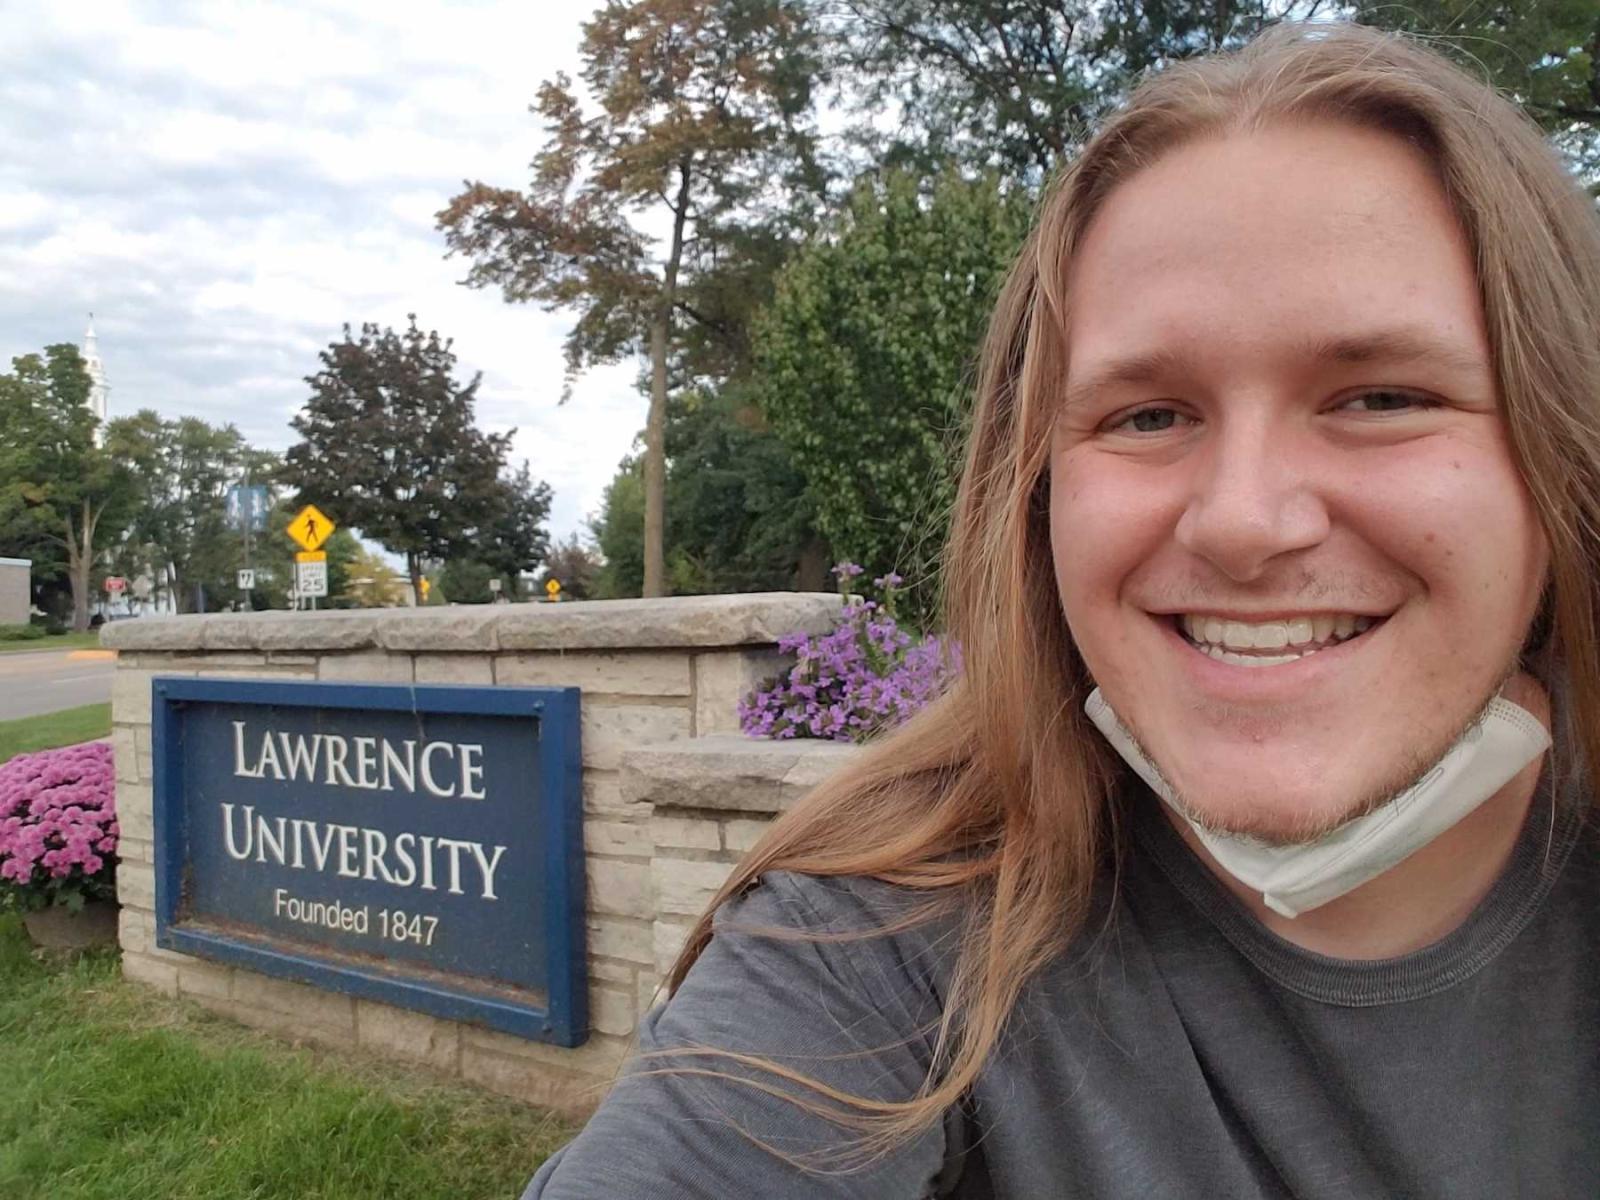 Harris Marks poses in front of a Lawrence University sign.